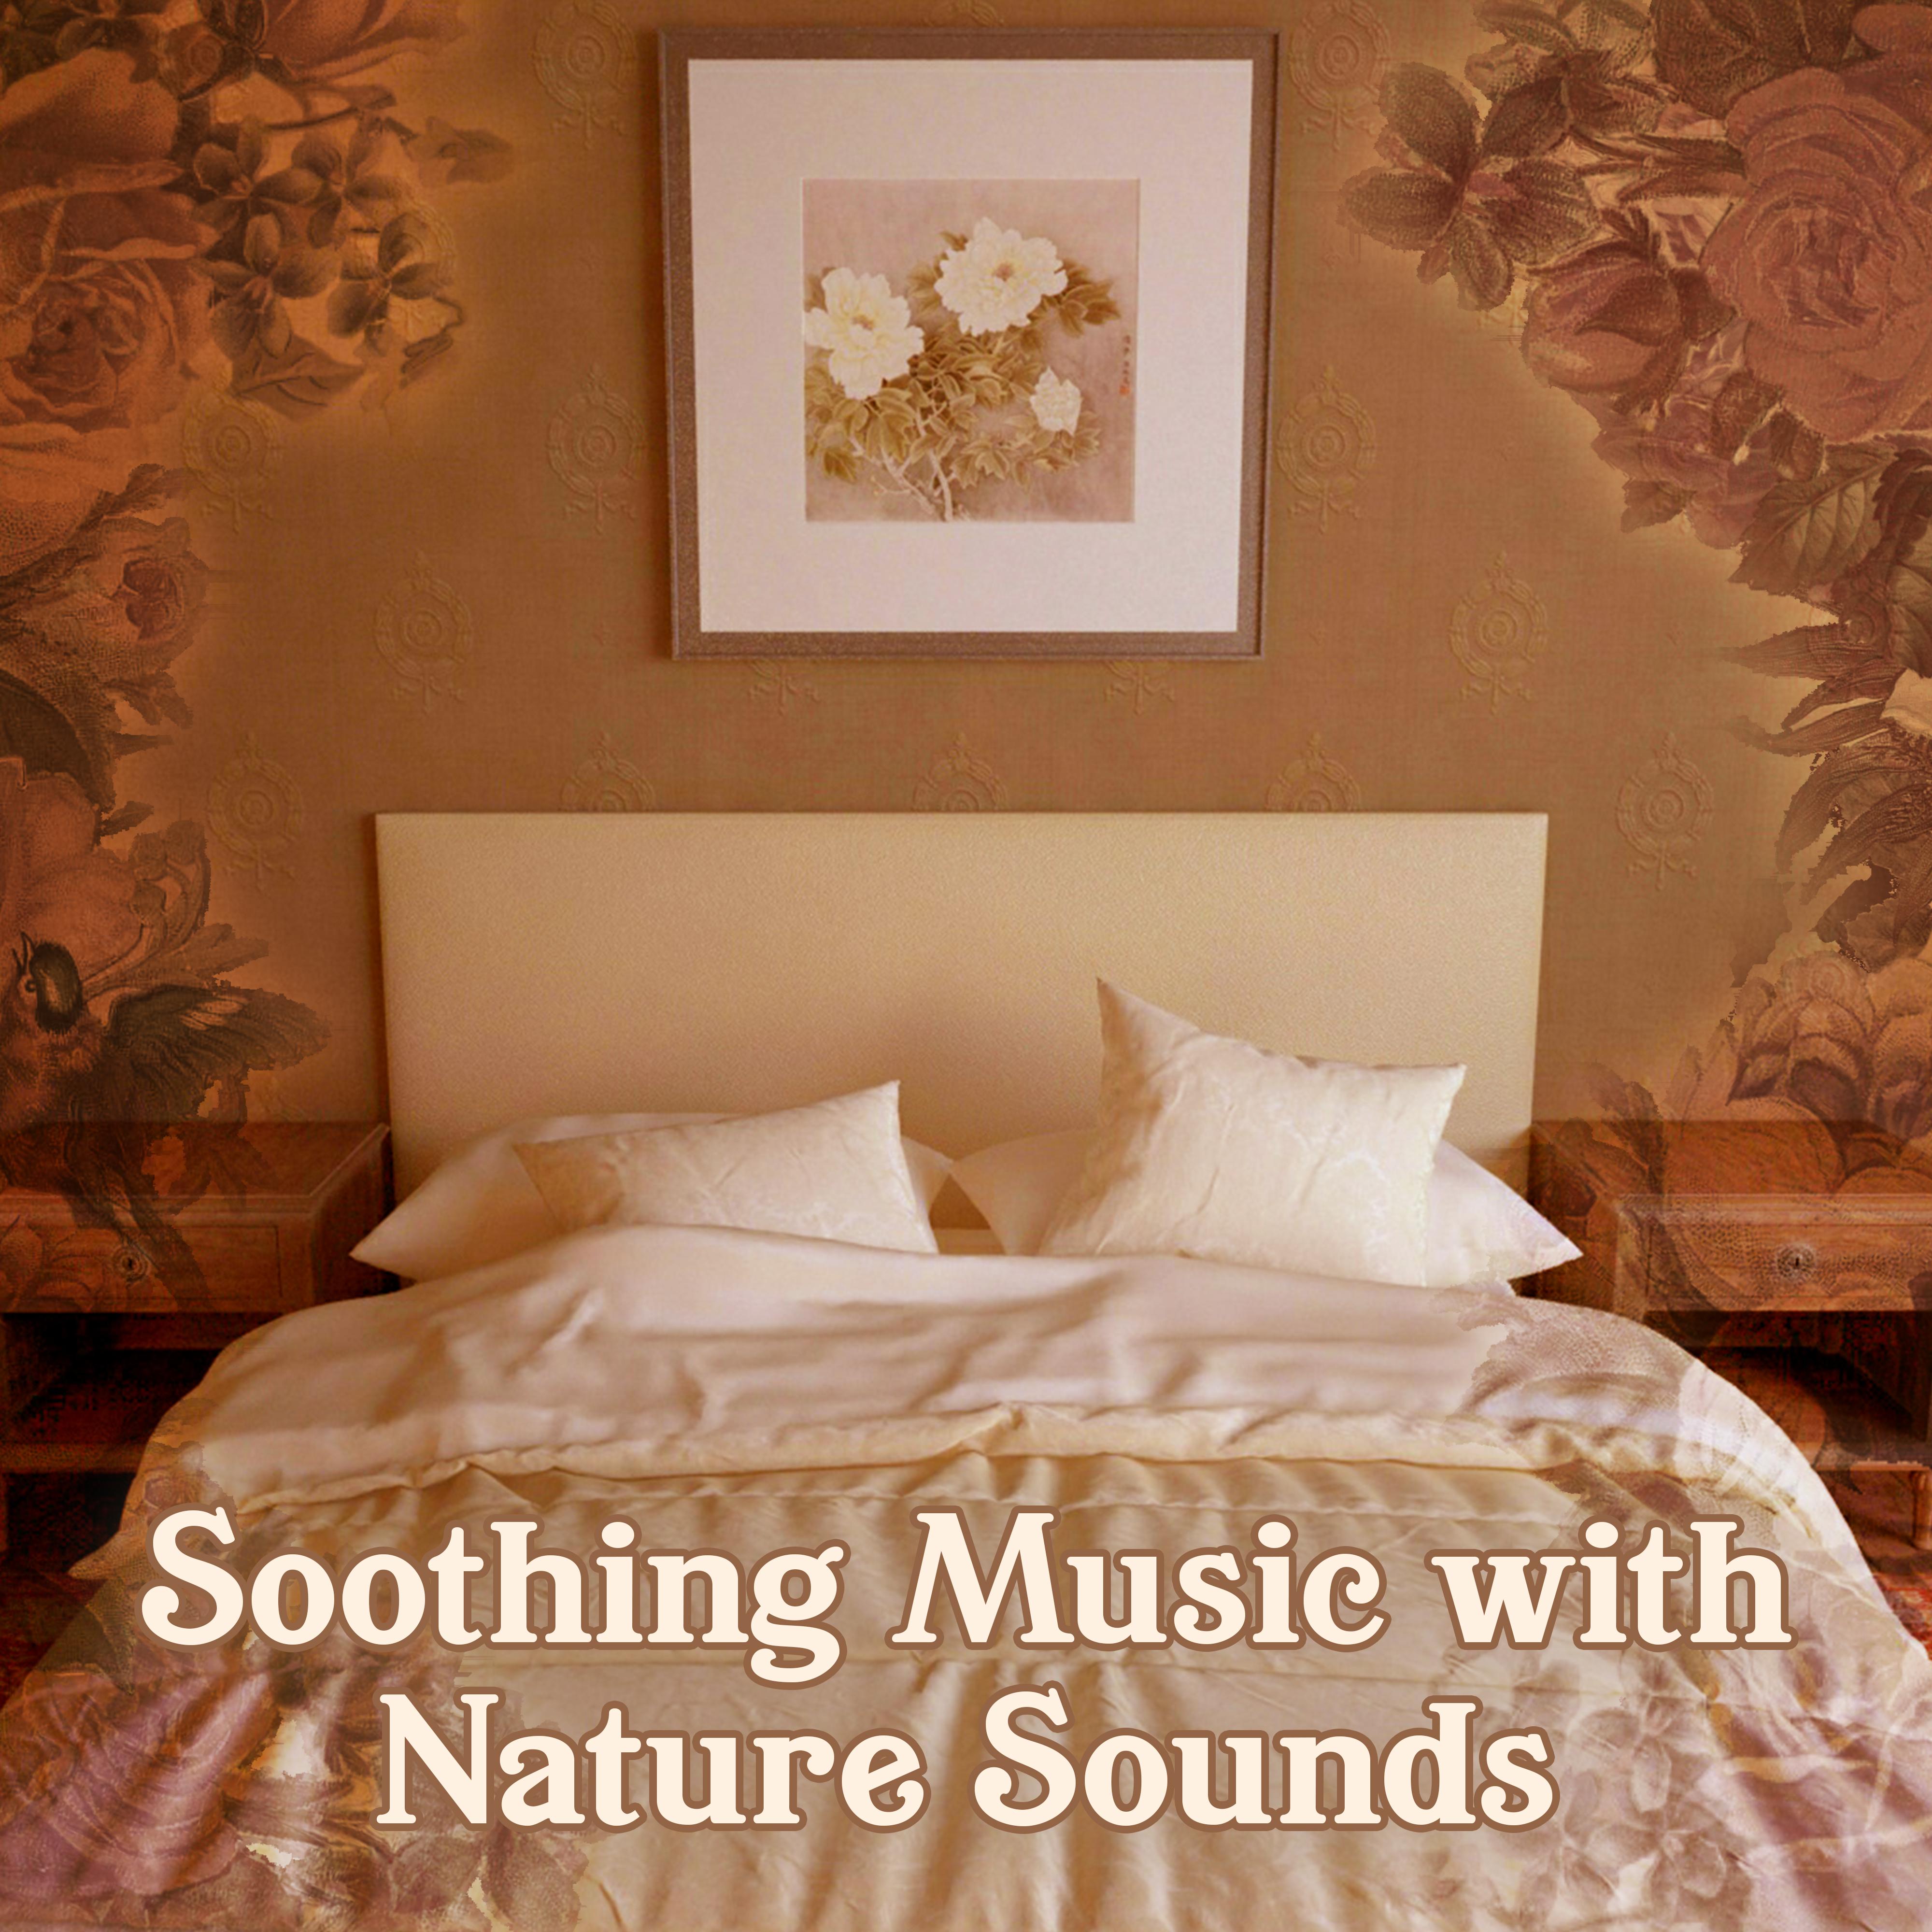 Soothing Music with Nature Sounds – Relaxing Sounds, Sleeping Hours, New Age Music, Dream All Night